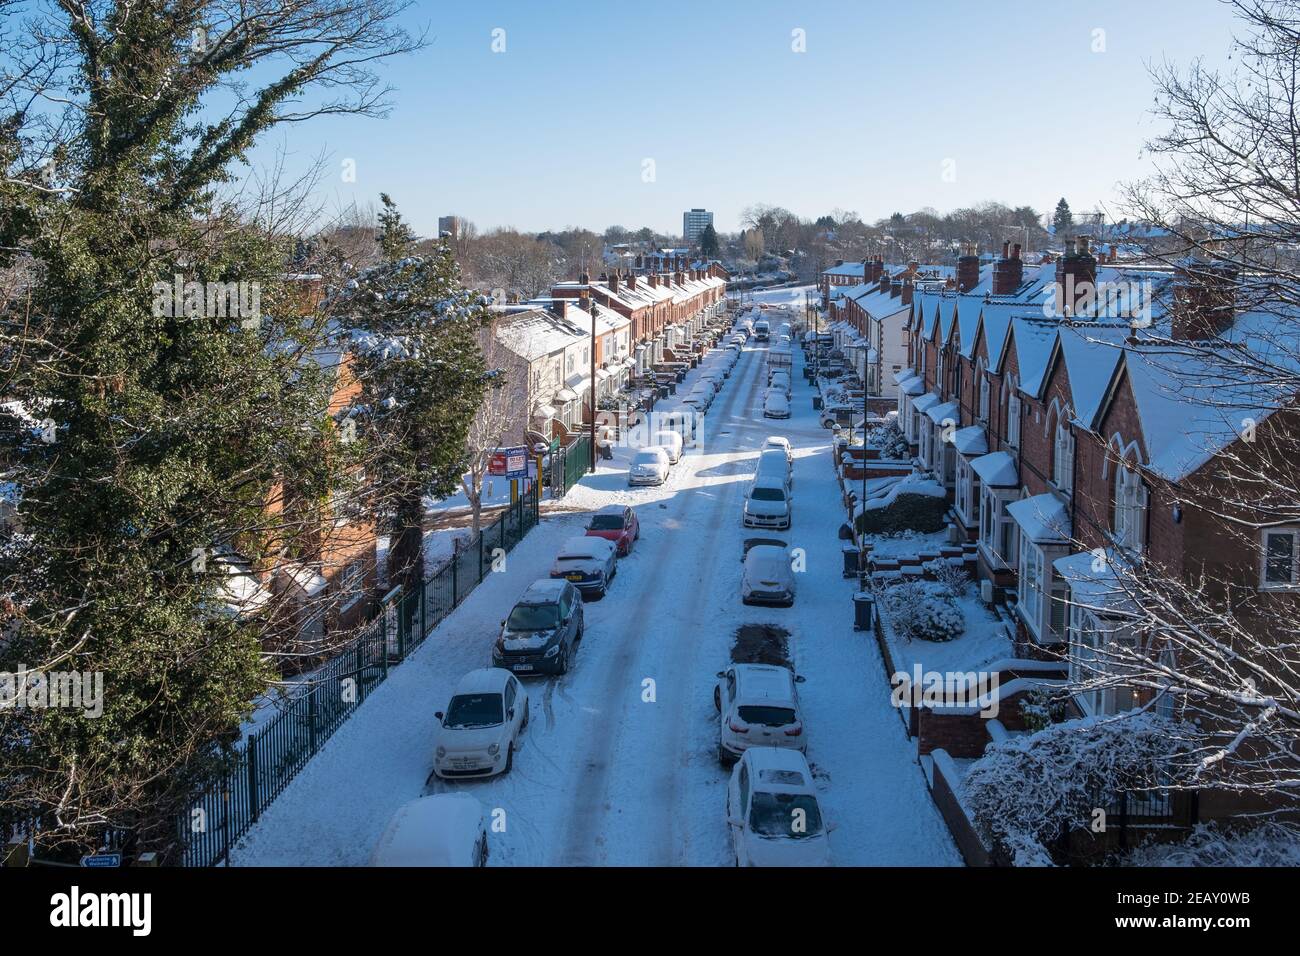 View of Snow covered Park Hill Road in Harborne, Birmingham from the walkway over the disused railway bridge Stock Photo